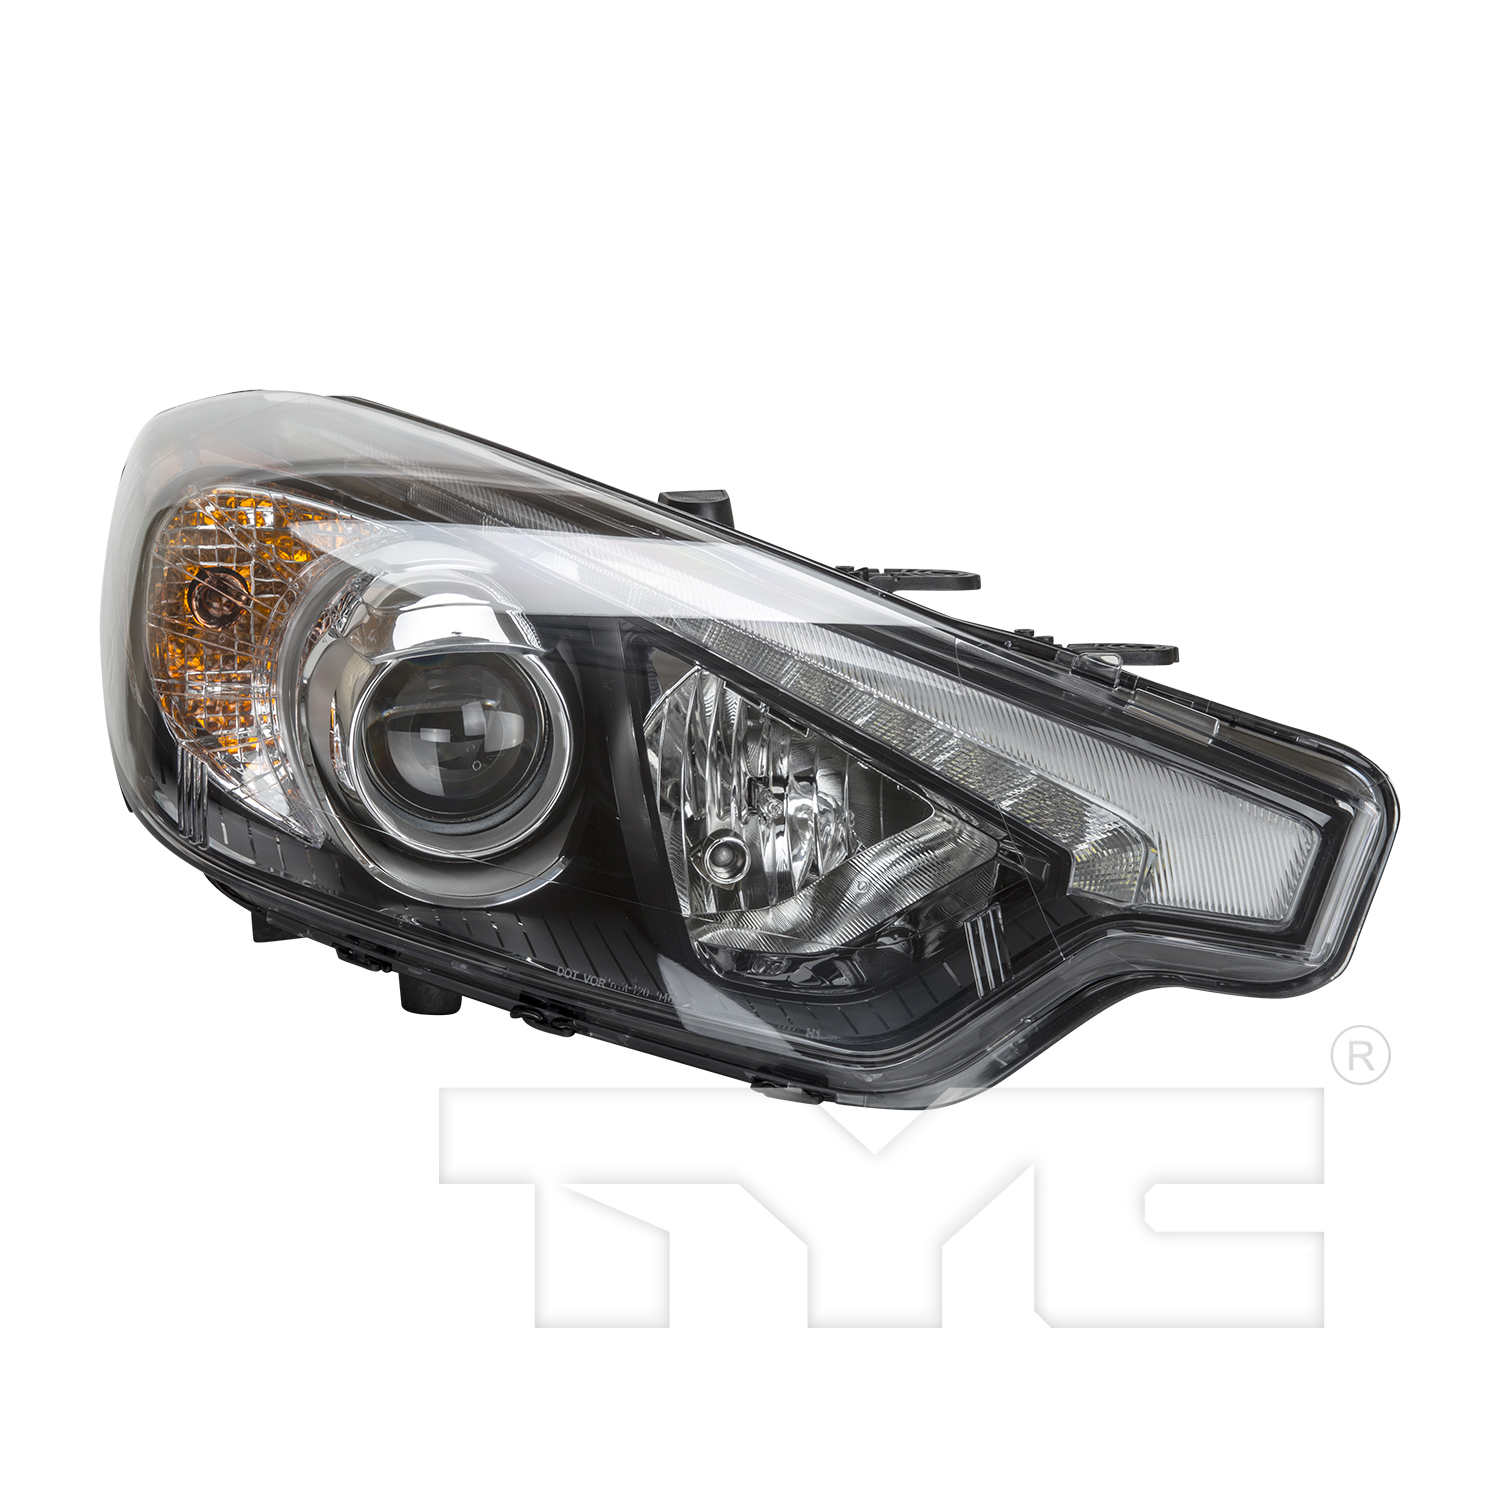 Aftermarket HEADLIGHTS for KIA - FORTE5, FORTE5,14-15,RT Headlamp assy composite